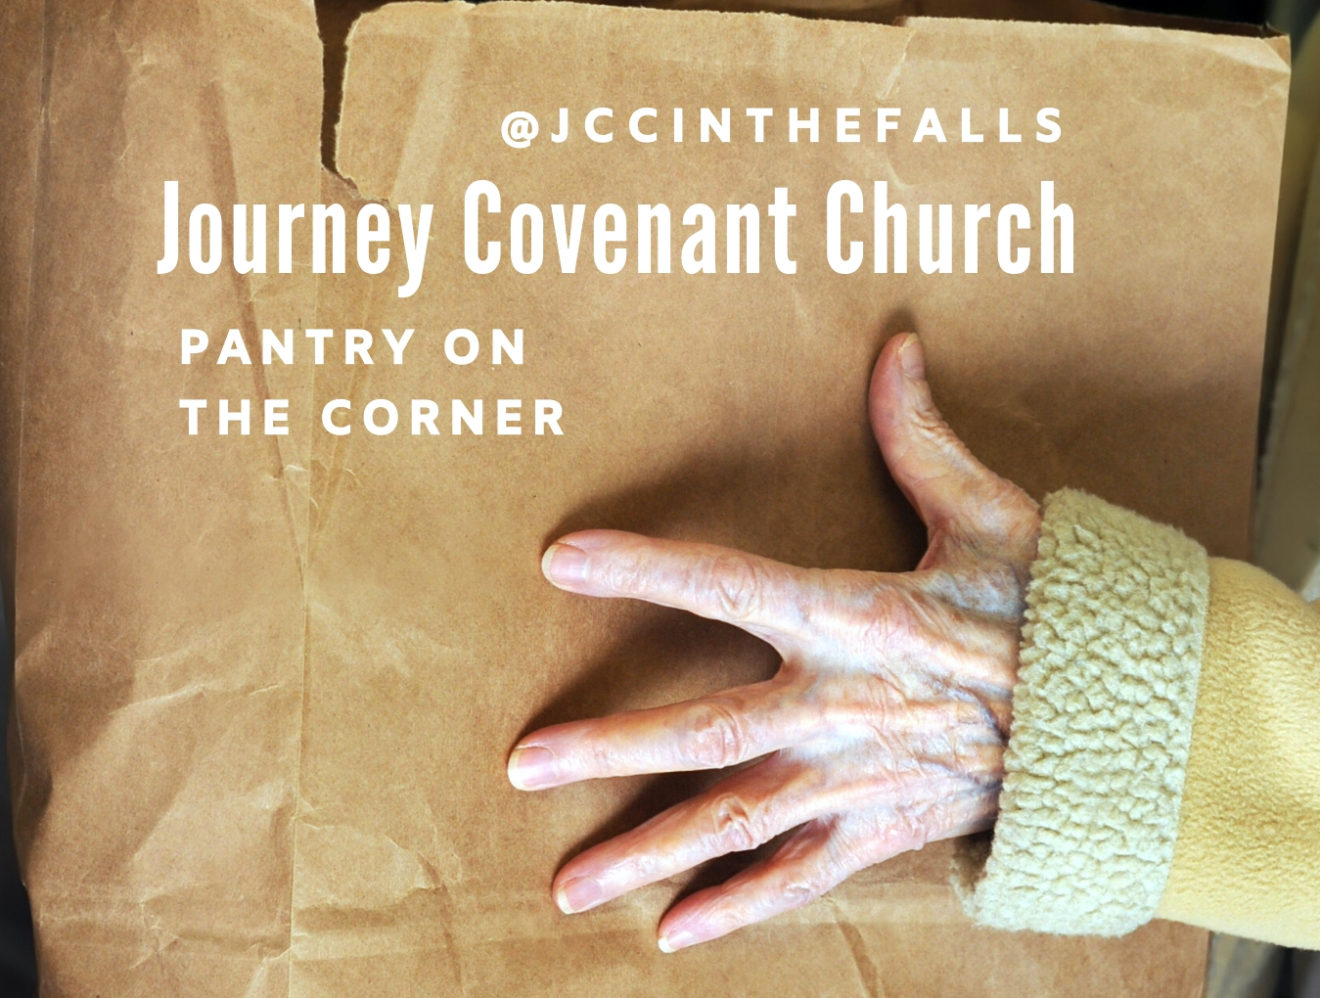 Pantry on the Corner at Journey Covenant Church